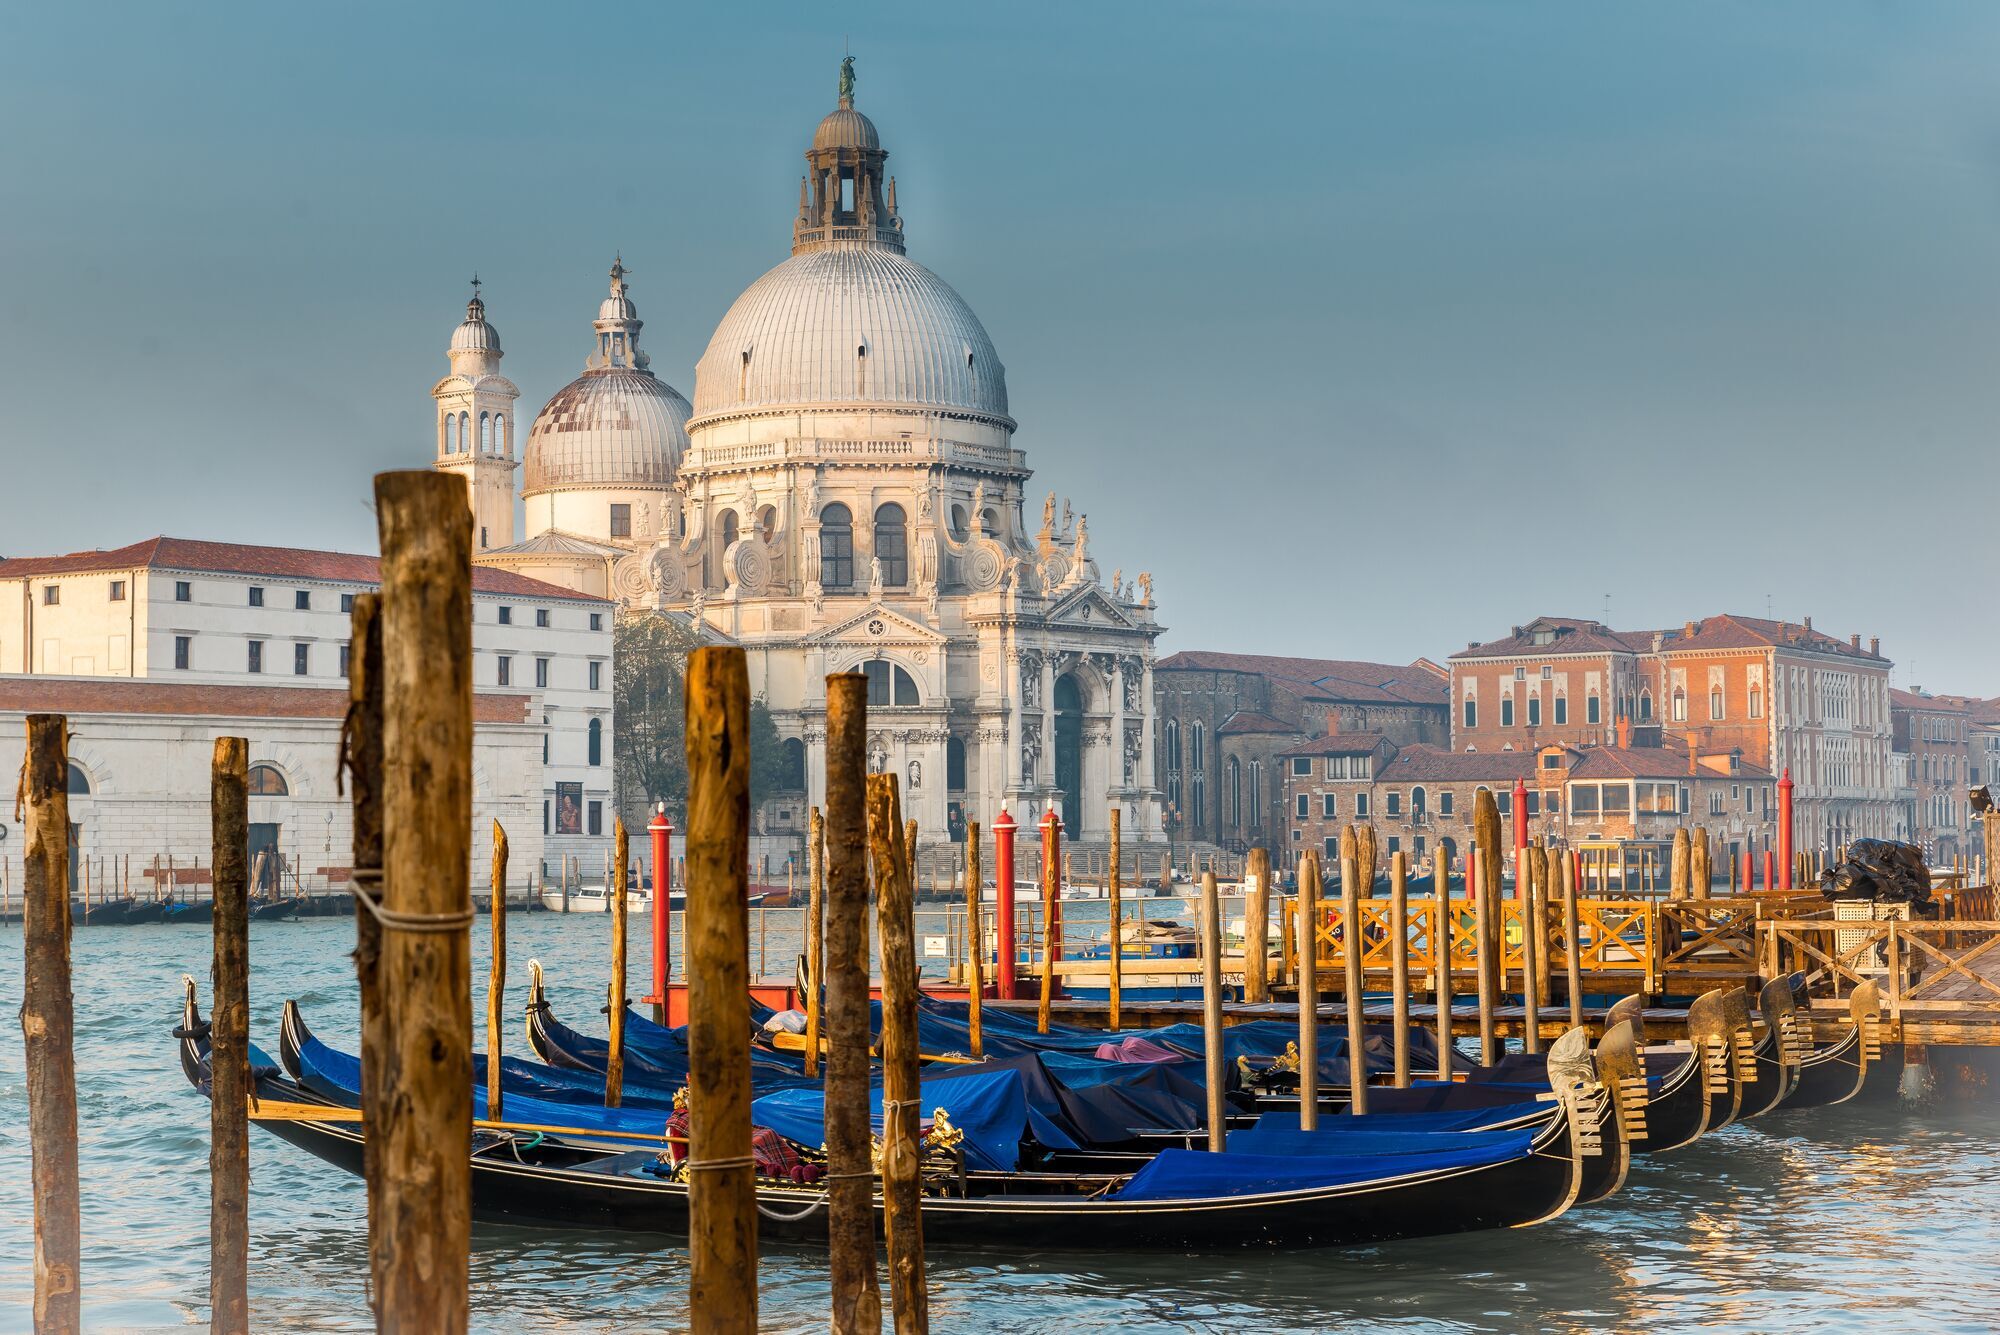 In search of romance: best European destinations for lovers